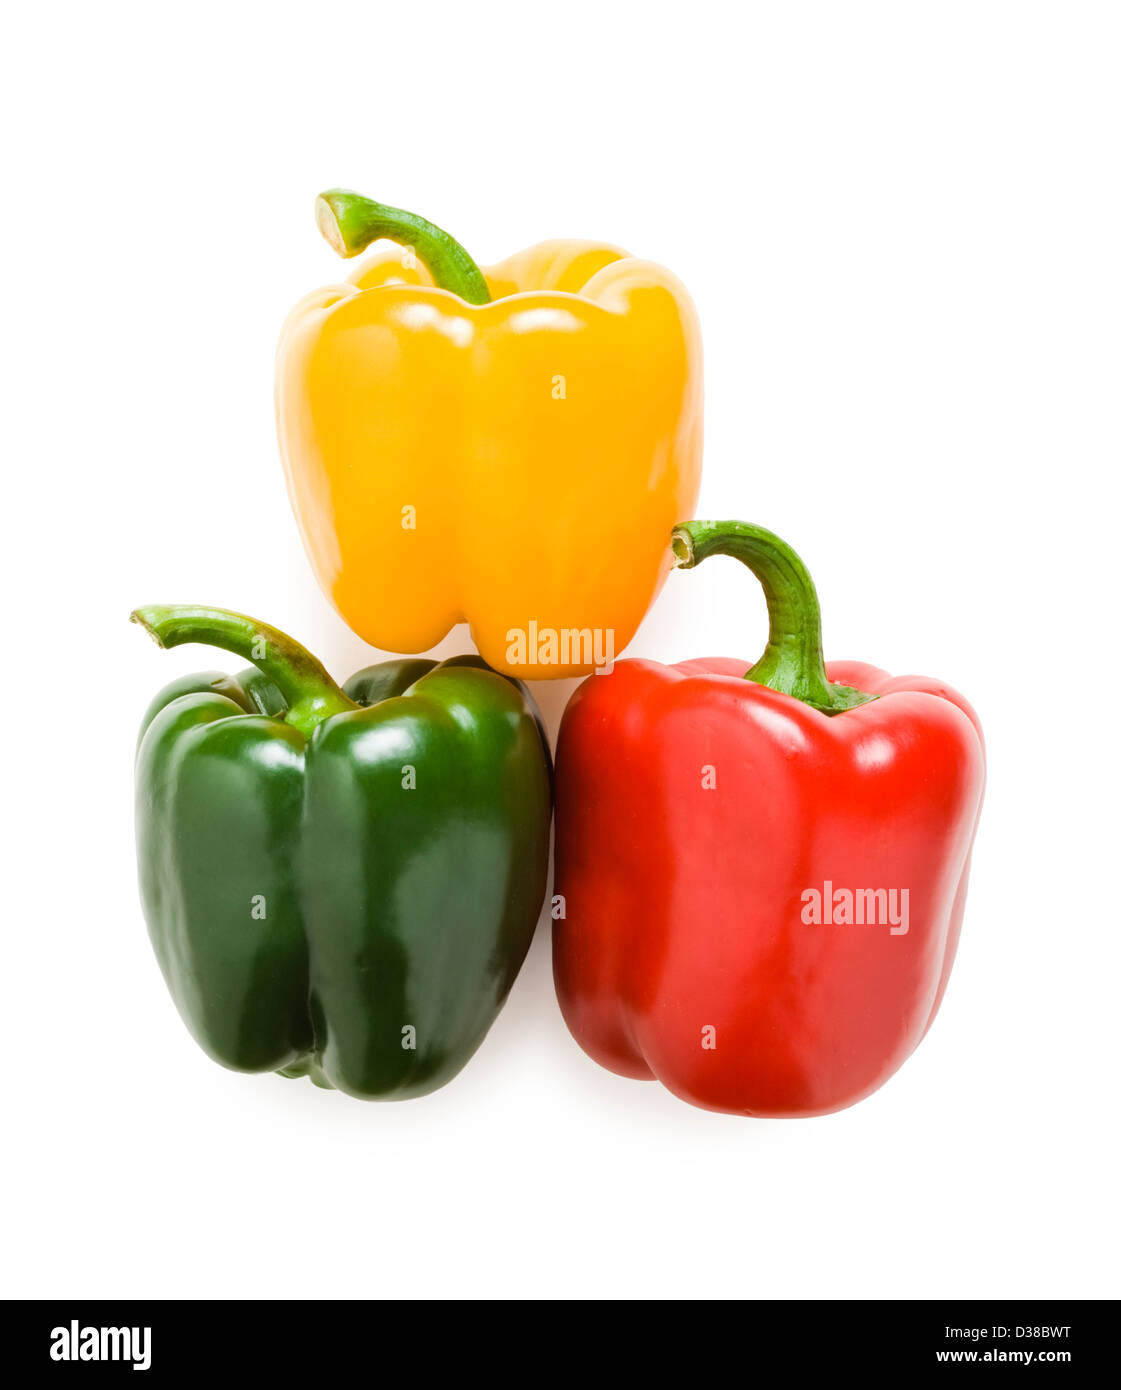 Red, yellow and green peppers. Stock Photo